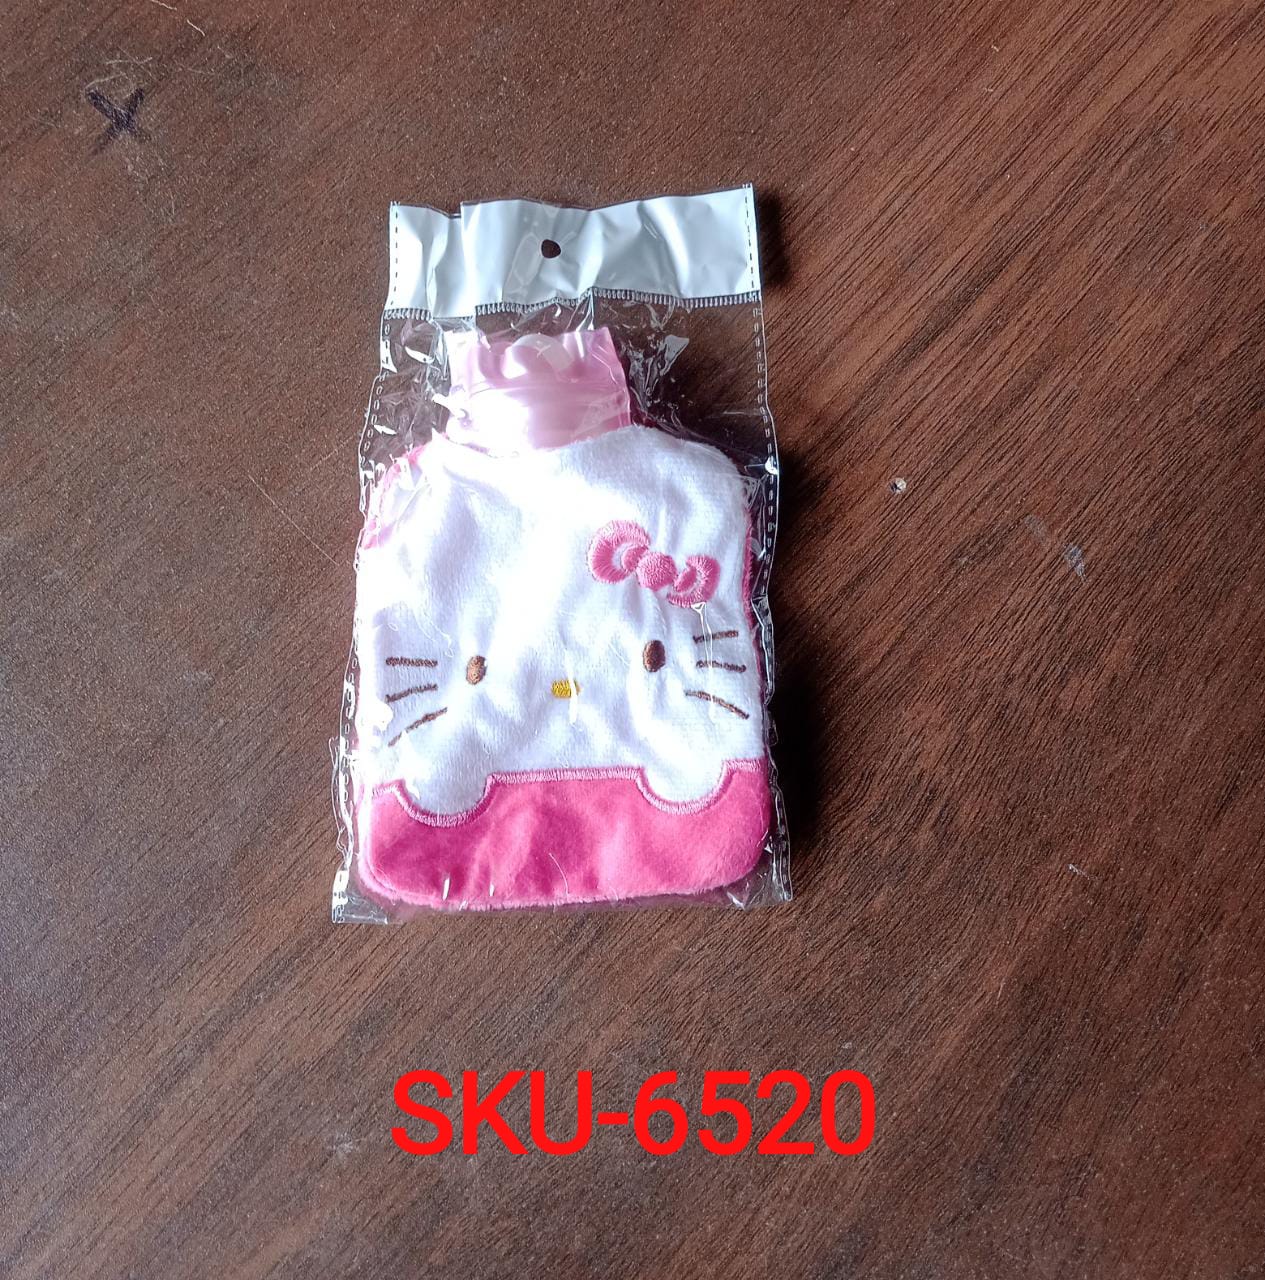 6520 Pink Hello Kitty small Hot Water Bag with Cover for Pain Relief, Neck, Shoulder Pain and Hand, Feet Warmer, Menstrual Cramps. DeoDap